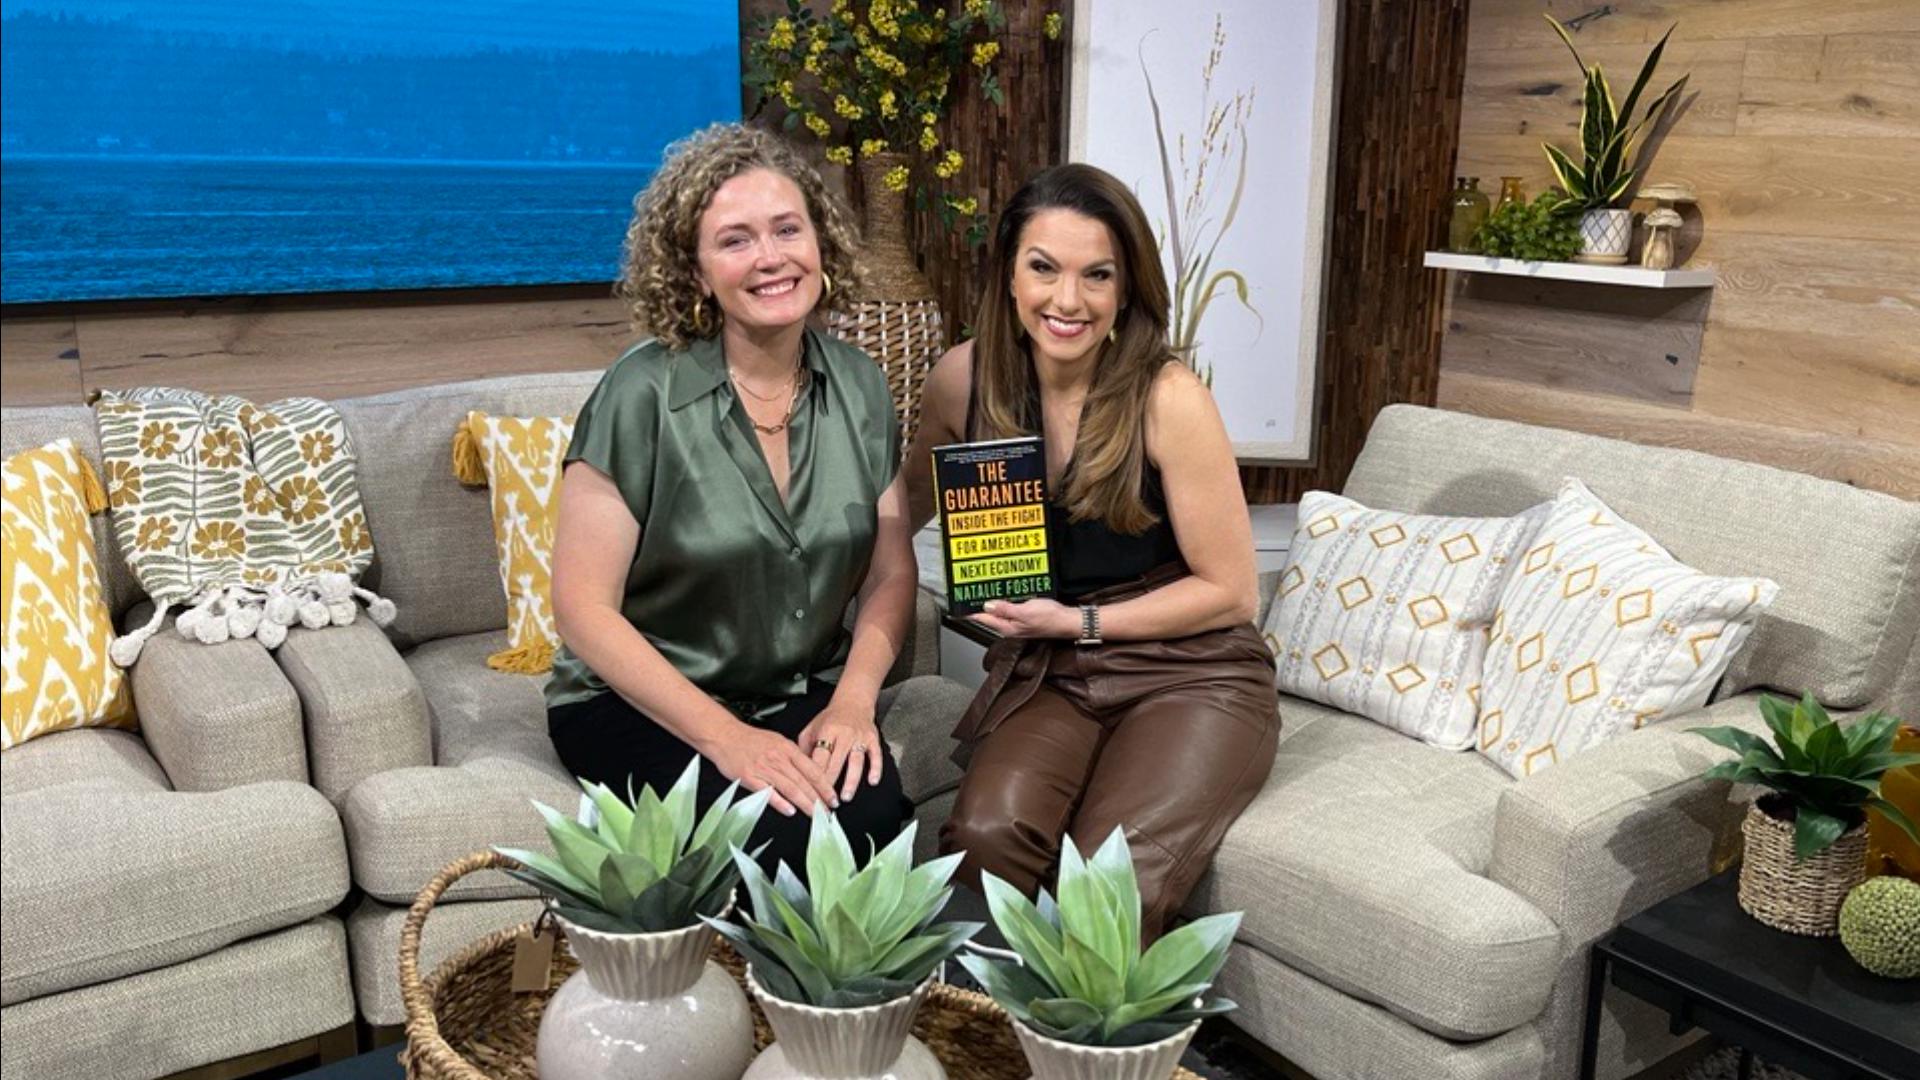 Author of "Guarantee," Natalie Foster is at Town Hall Seattle May 15th.  #newdaynw